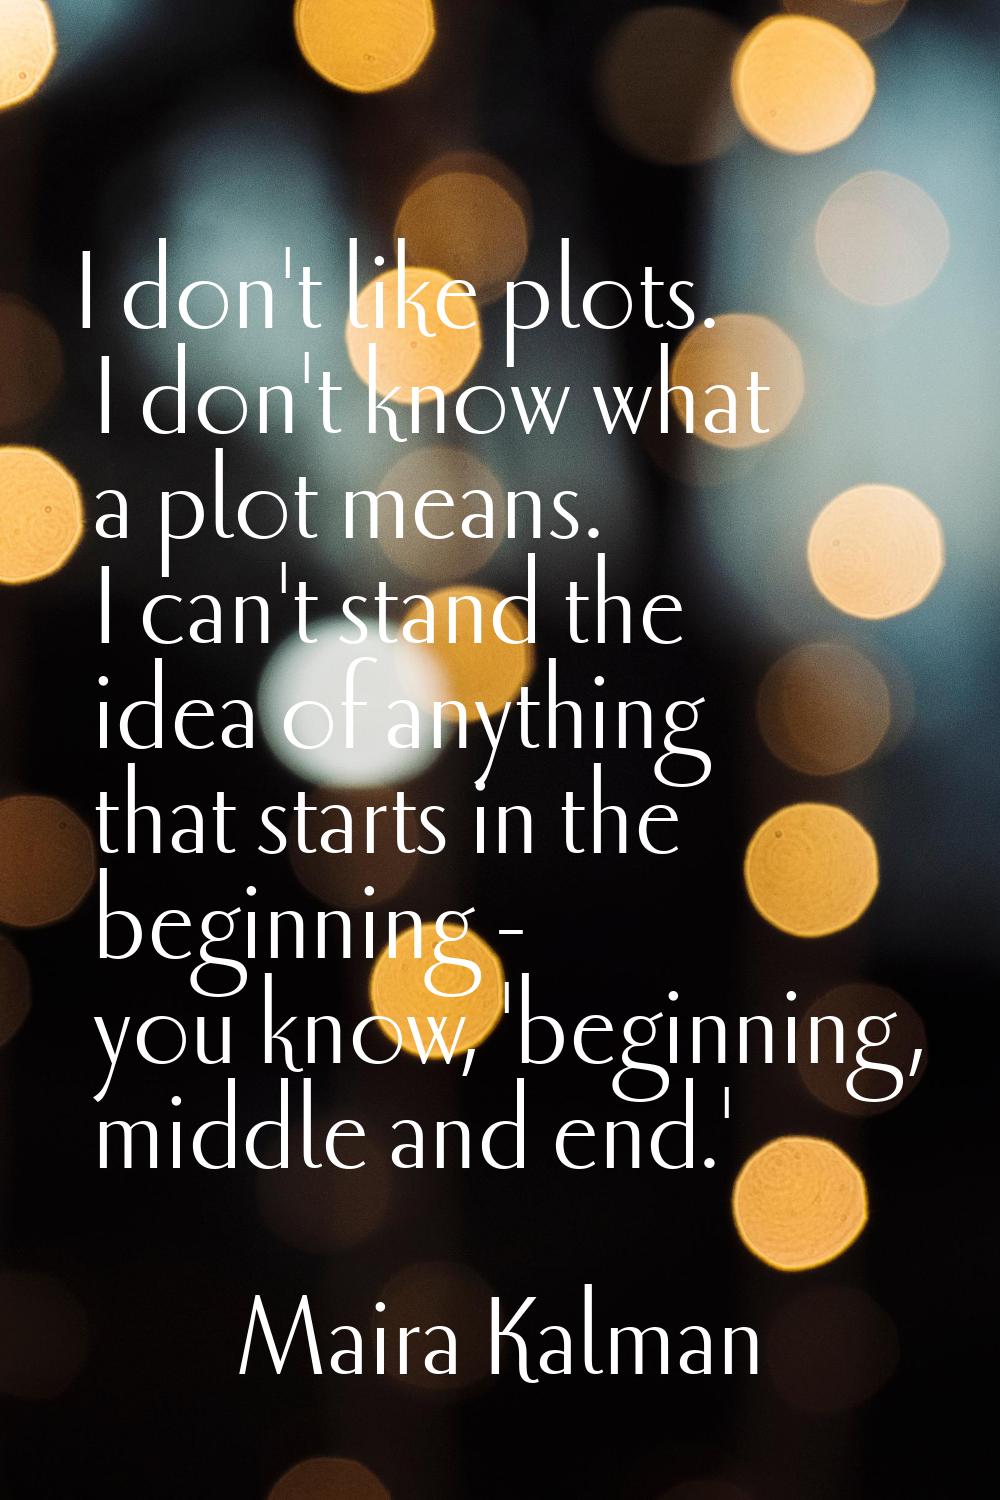 I don't like plots. I don't know what a plot means. I can't stand the idea of anything that starts 